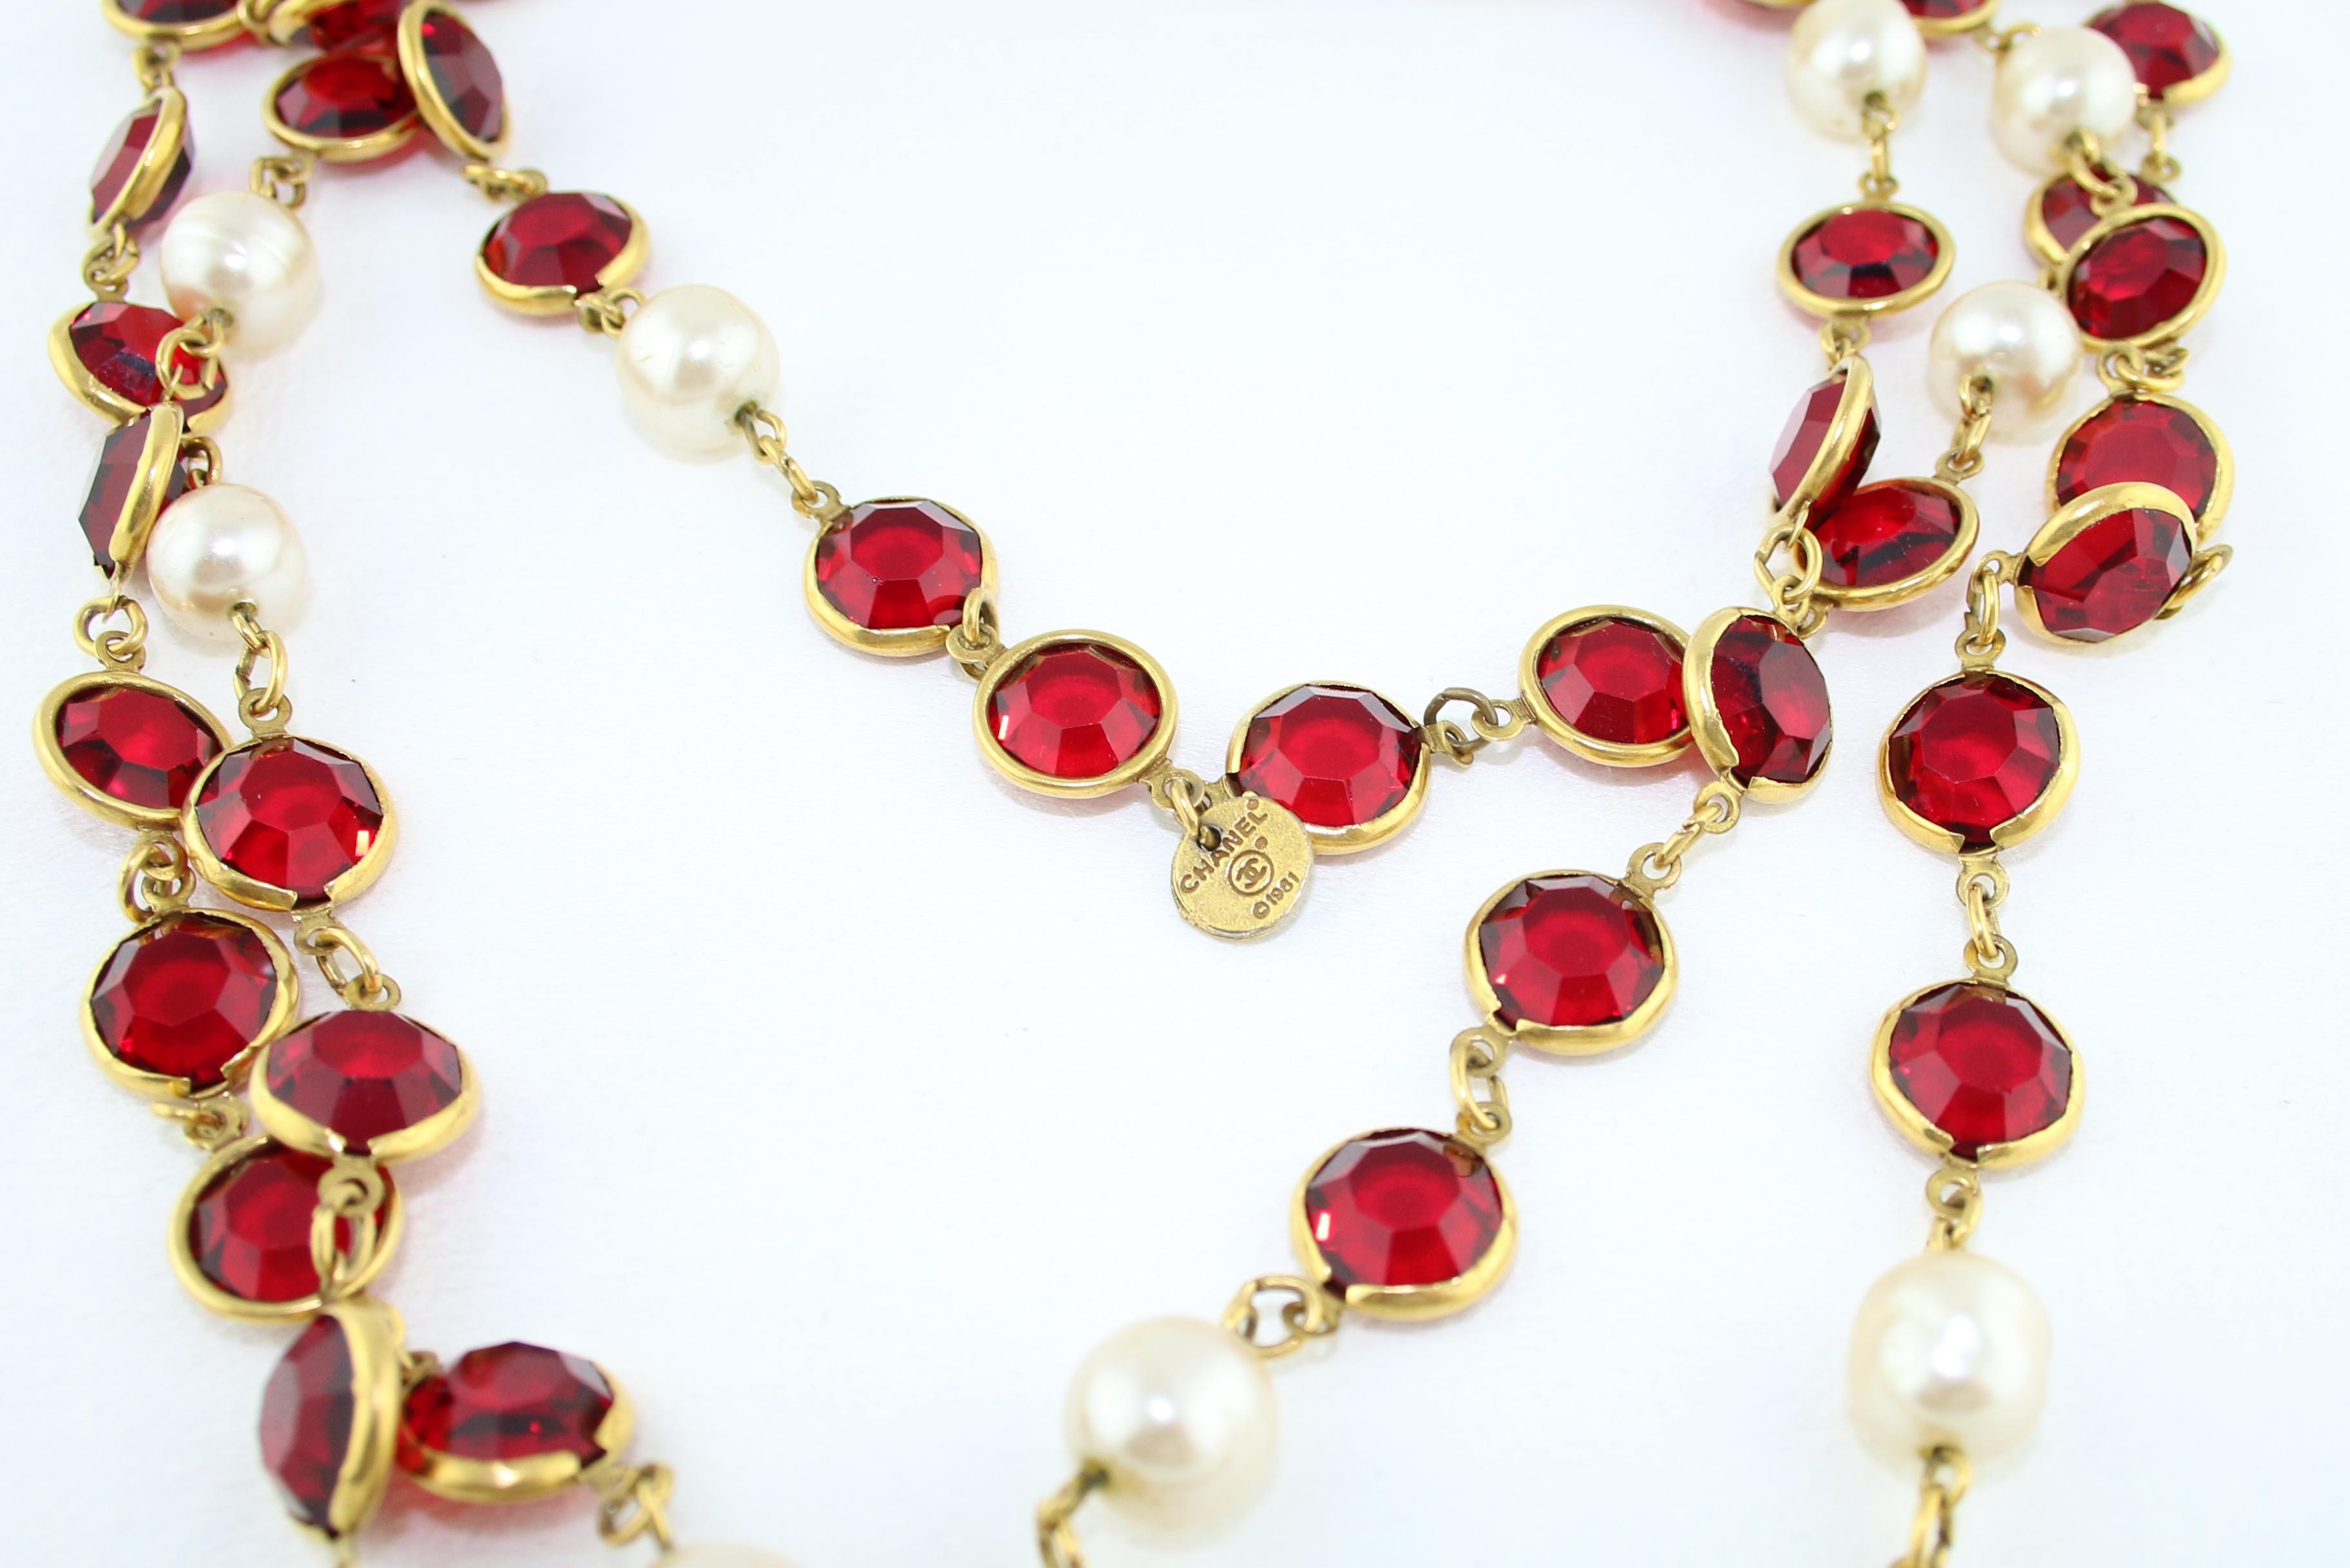 Vintage CHANEL 1981 Faux Pearl and Red Gripoix Long Necklace For Sale ...